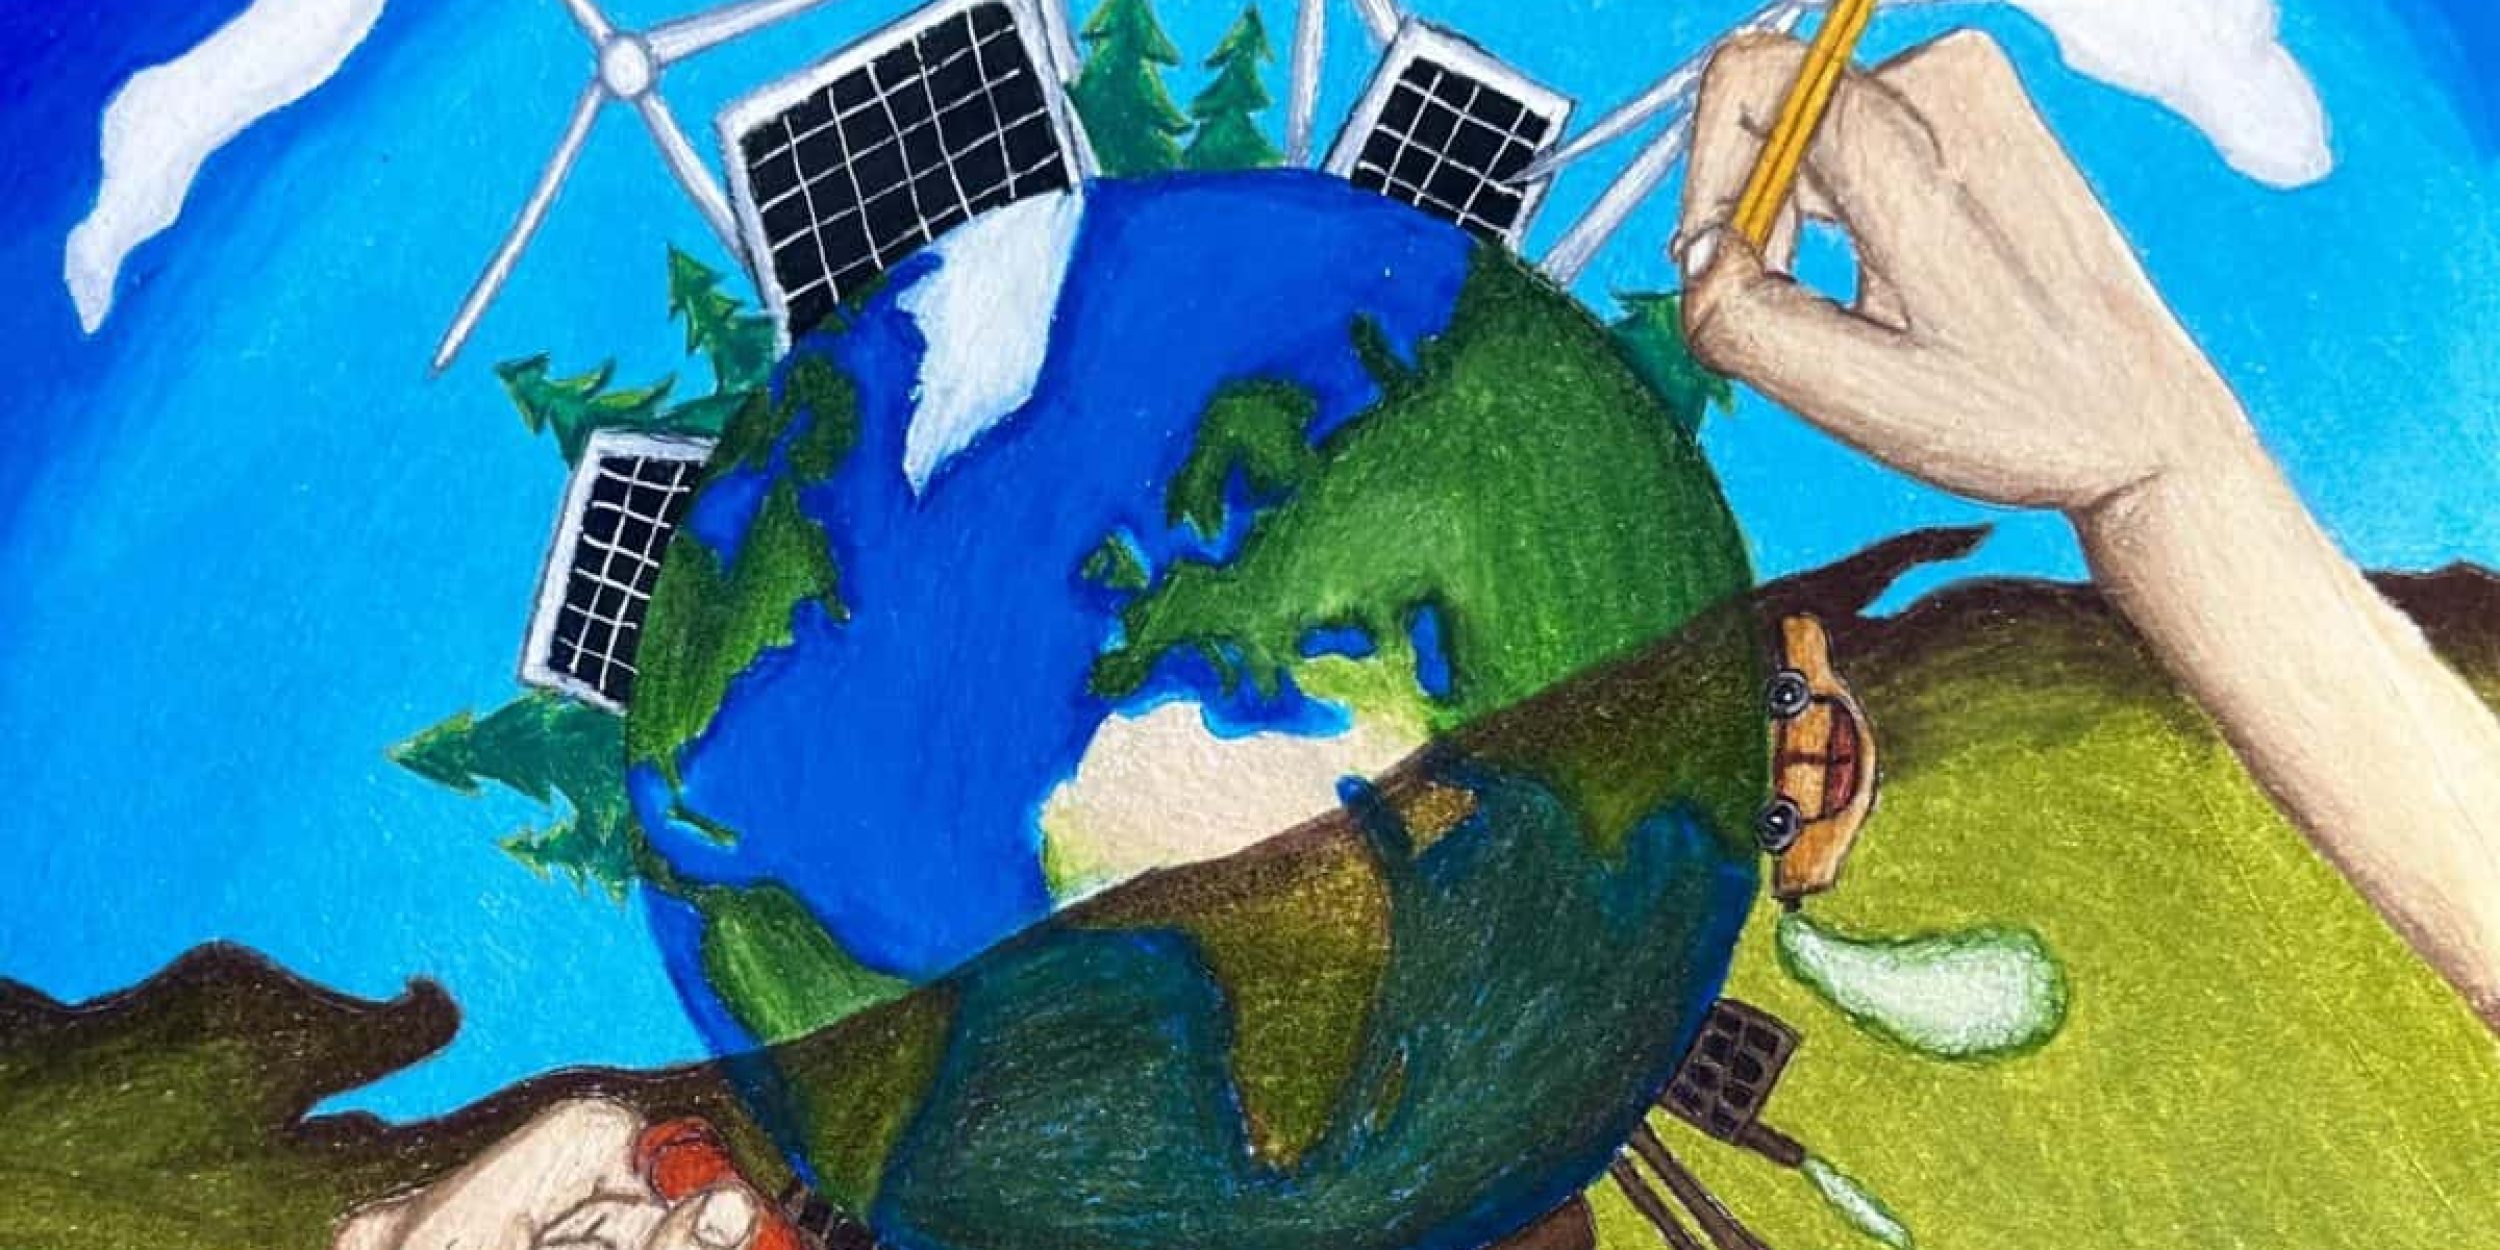 painting of hands designing a cleaner globe. One half of the image depicts a dirty Earth, the other a clean energy Earth.